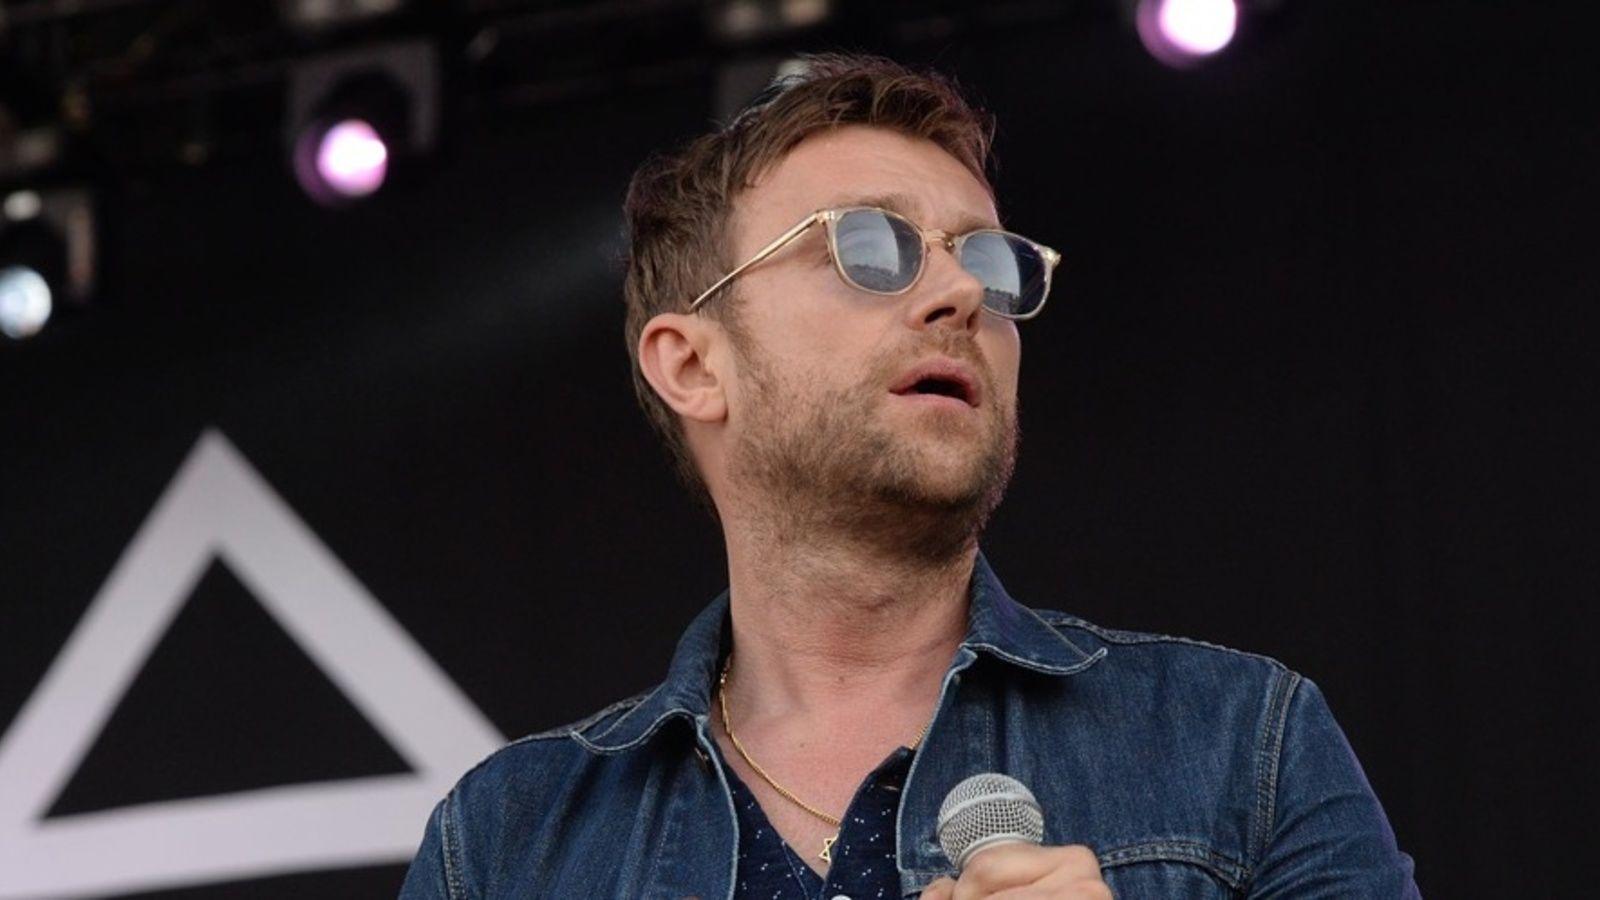 Watch Damon Albarn Get Carried Off Roskilde's Stage After a Five